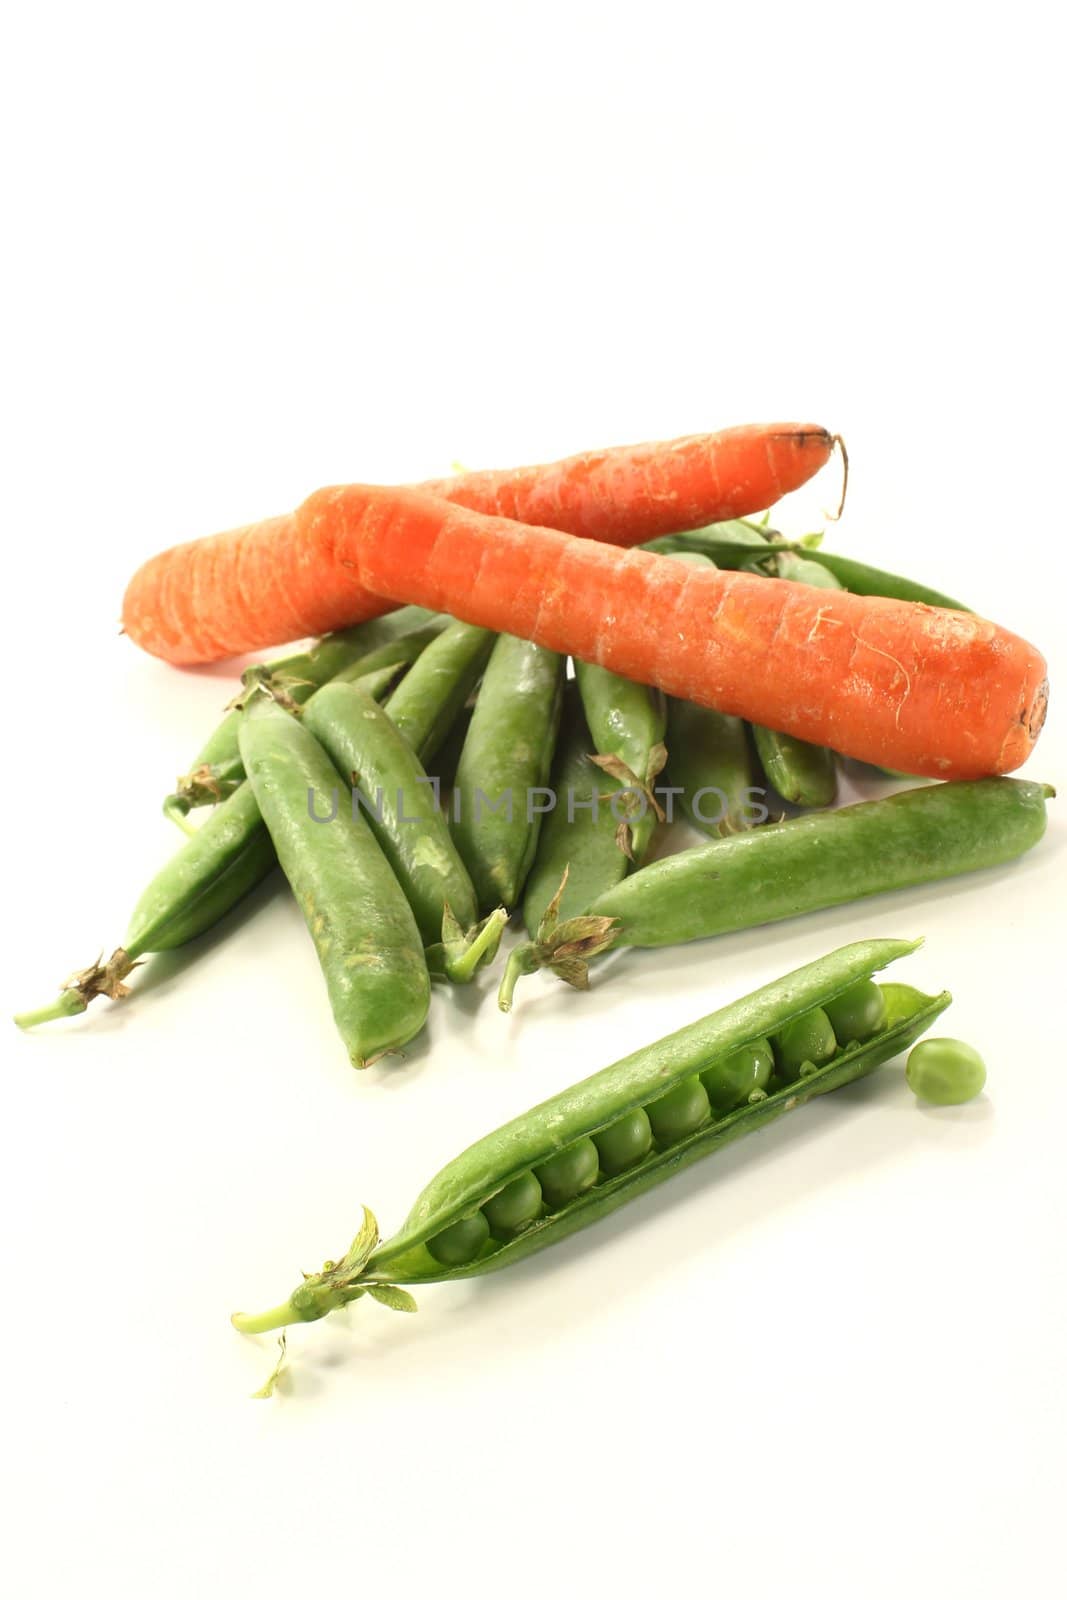 peas and carrots by silencefoto